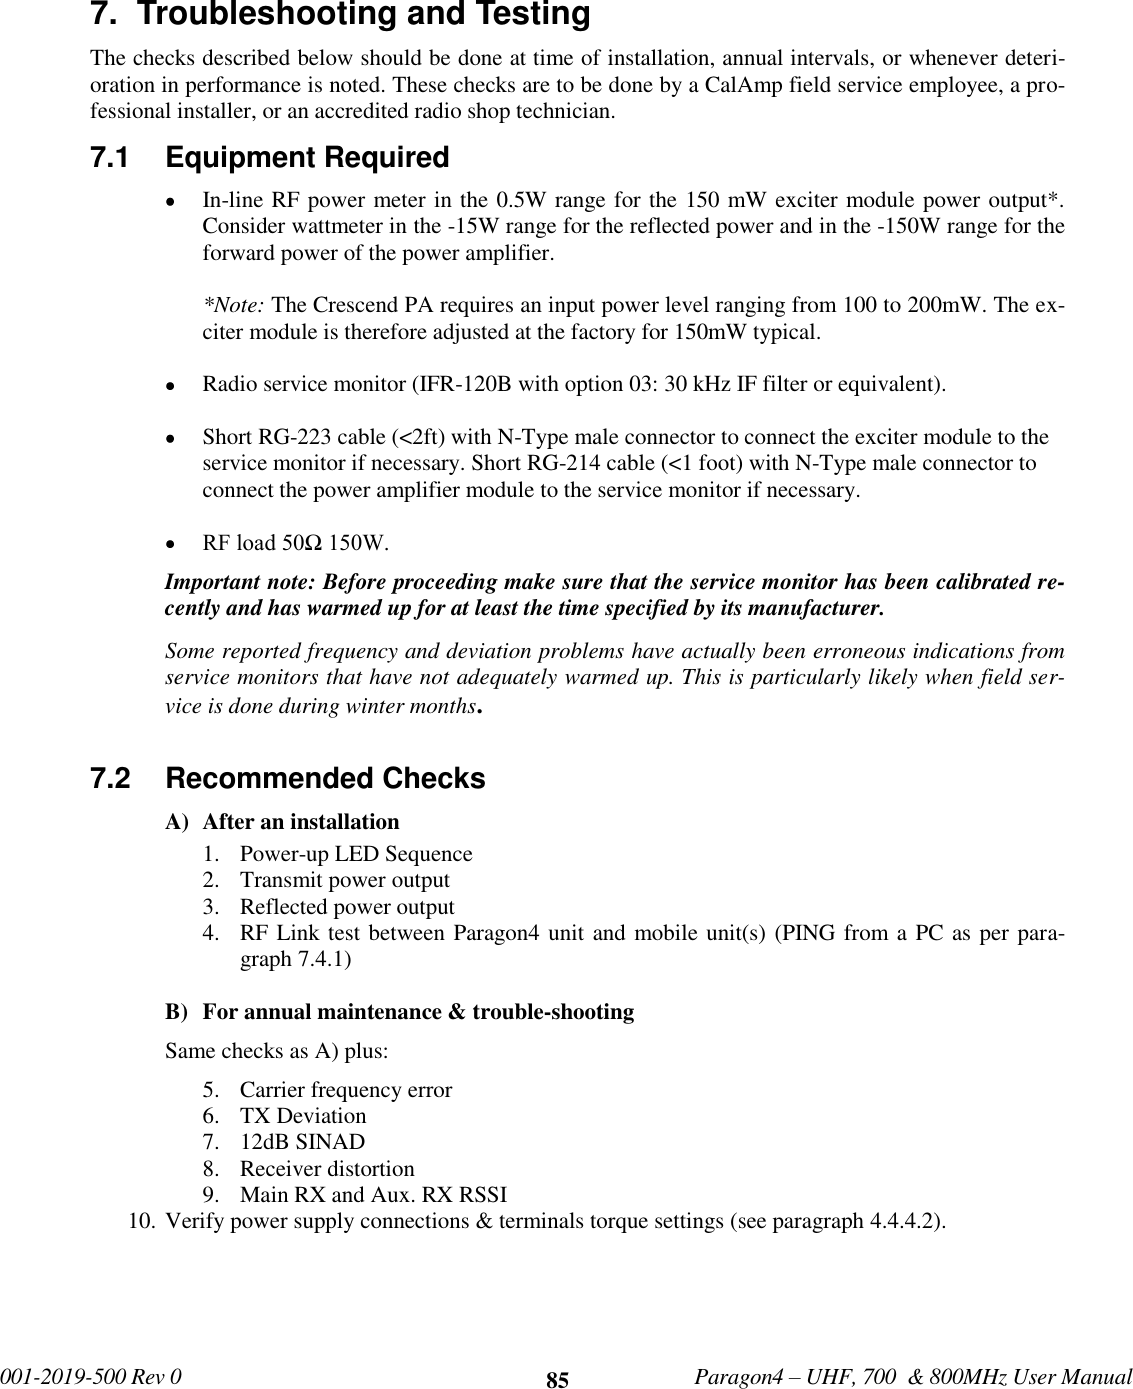              001-2019-500 Rev 0   Paragon4 – UHF, 700  &amp; 800MHz User Manual     85 7.  Troubleshooting and Testing  The checks described below should be done at time of installation, annual intervals, or whenever deteri-oration in performance is noted. These checks are to be done by a CalAmp field service employee, a pro-fessional installer, or an accredited radio shop technician. 7.1  Equipment Required   In-line RF power meter in the 0.5W range for the 150 mW exciter module power output*. Consider wattmeter in the -15W range for the reflected power and in the -150W range for the forward power of the power amplifier.  *Note: The Crescend PA requires an input power level ranging from 100 to 200mW. The ex-citer module is therefore adjusted at the factory for 150mW typical.    Radio service monitor (IFR-120B with option 03: 30 kHz IF filter or equivalent).   Short RG-223 cable (&lt;2ft) with N-Type male connector to connect the exciter module to the service monitor if necessary. Short RG-214 cable (&lt;1 foot) with N-Type male connector to connect the power amplifier module to the service monitor if necessary.   RF load 50Ω 150W. Important note: Before proceeding make sure that the service monitor has been calibrated re-cently and has warmed up for at least the time specified by its manufacturer.  Some reported frequency and deviation problems have actually been erroneous indications from service monitors that have not adequately warmed up. This is particularly likely when field ser-vice is done during winter months.  7.2  Recommended Checks   A) After an installation 1. Power-up LED Sequence 2. Transmit power output 3. Reflected power output 4. RF Link test between Paragon4 unit and mobile unit(s) (PING from a PC as per para-graph 7.4.1)   B) For annual maintenance &amp; trouble-shooting Same checks as A) plus: 5. Carrier frequency error 6. TX Deviation 7. 12dB SINAD 8. Receiver distortion 9. Main RX and Aux. RX RSSI 10. Verify power supply connections &amp; terminals torque settings (see paragraph 4.4.4.2). 